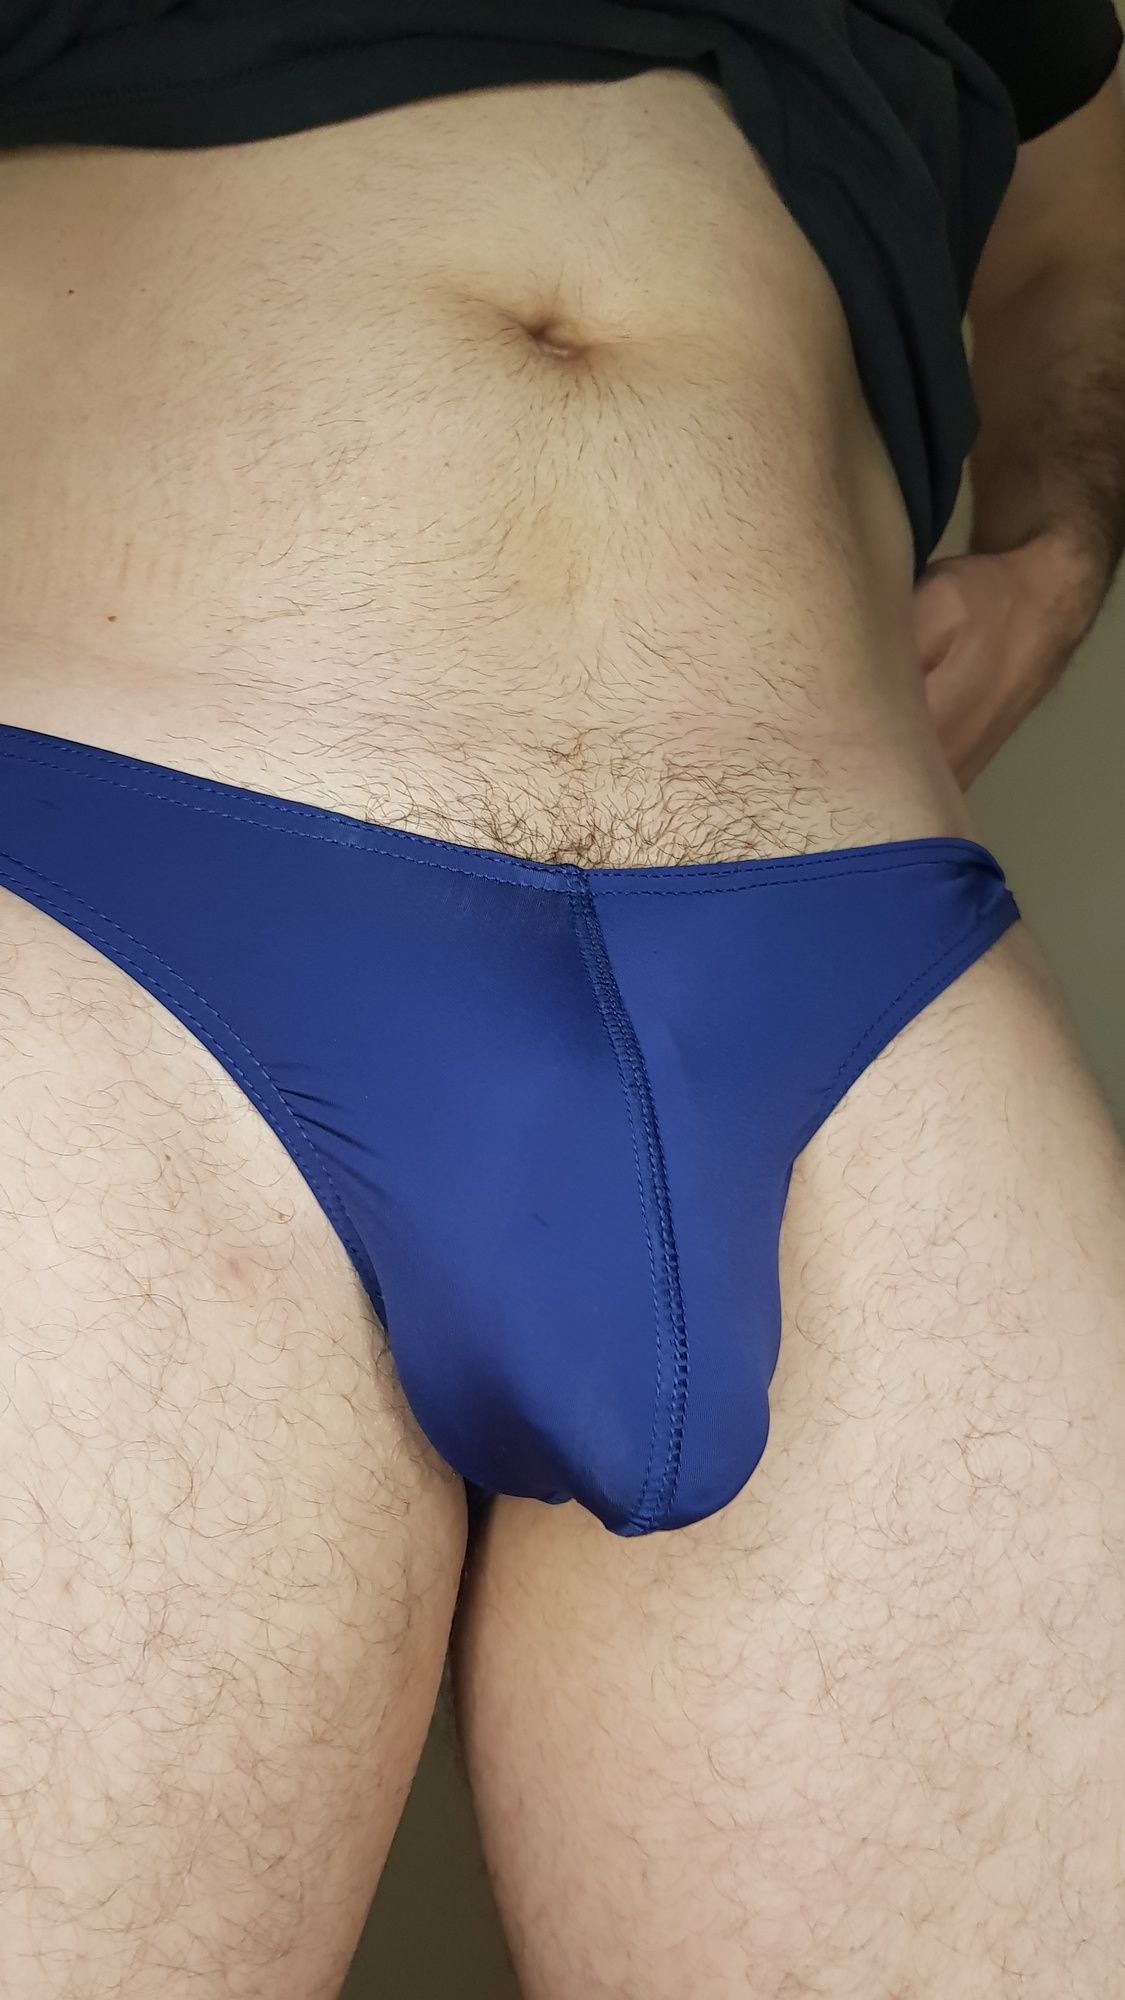 Should i go to pool in this speedos? #4